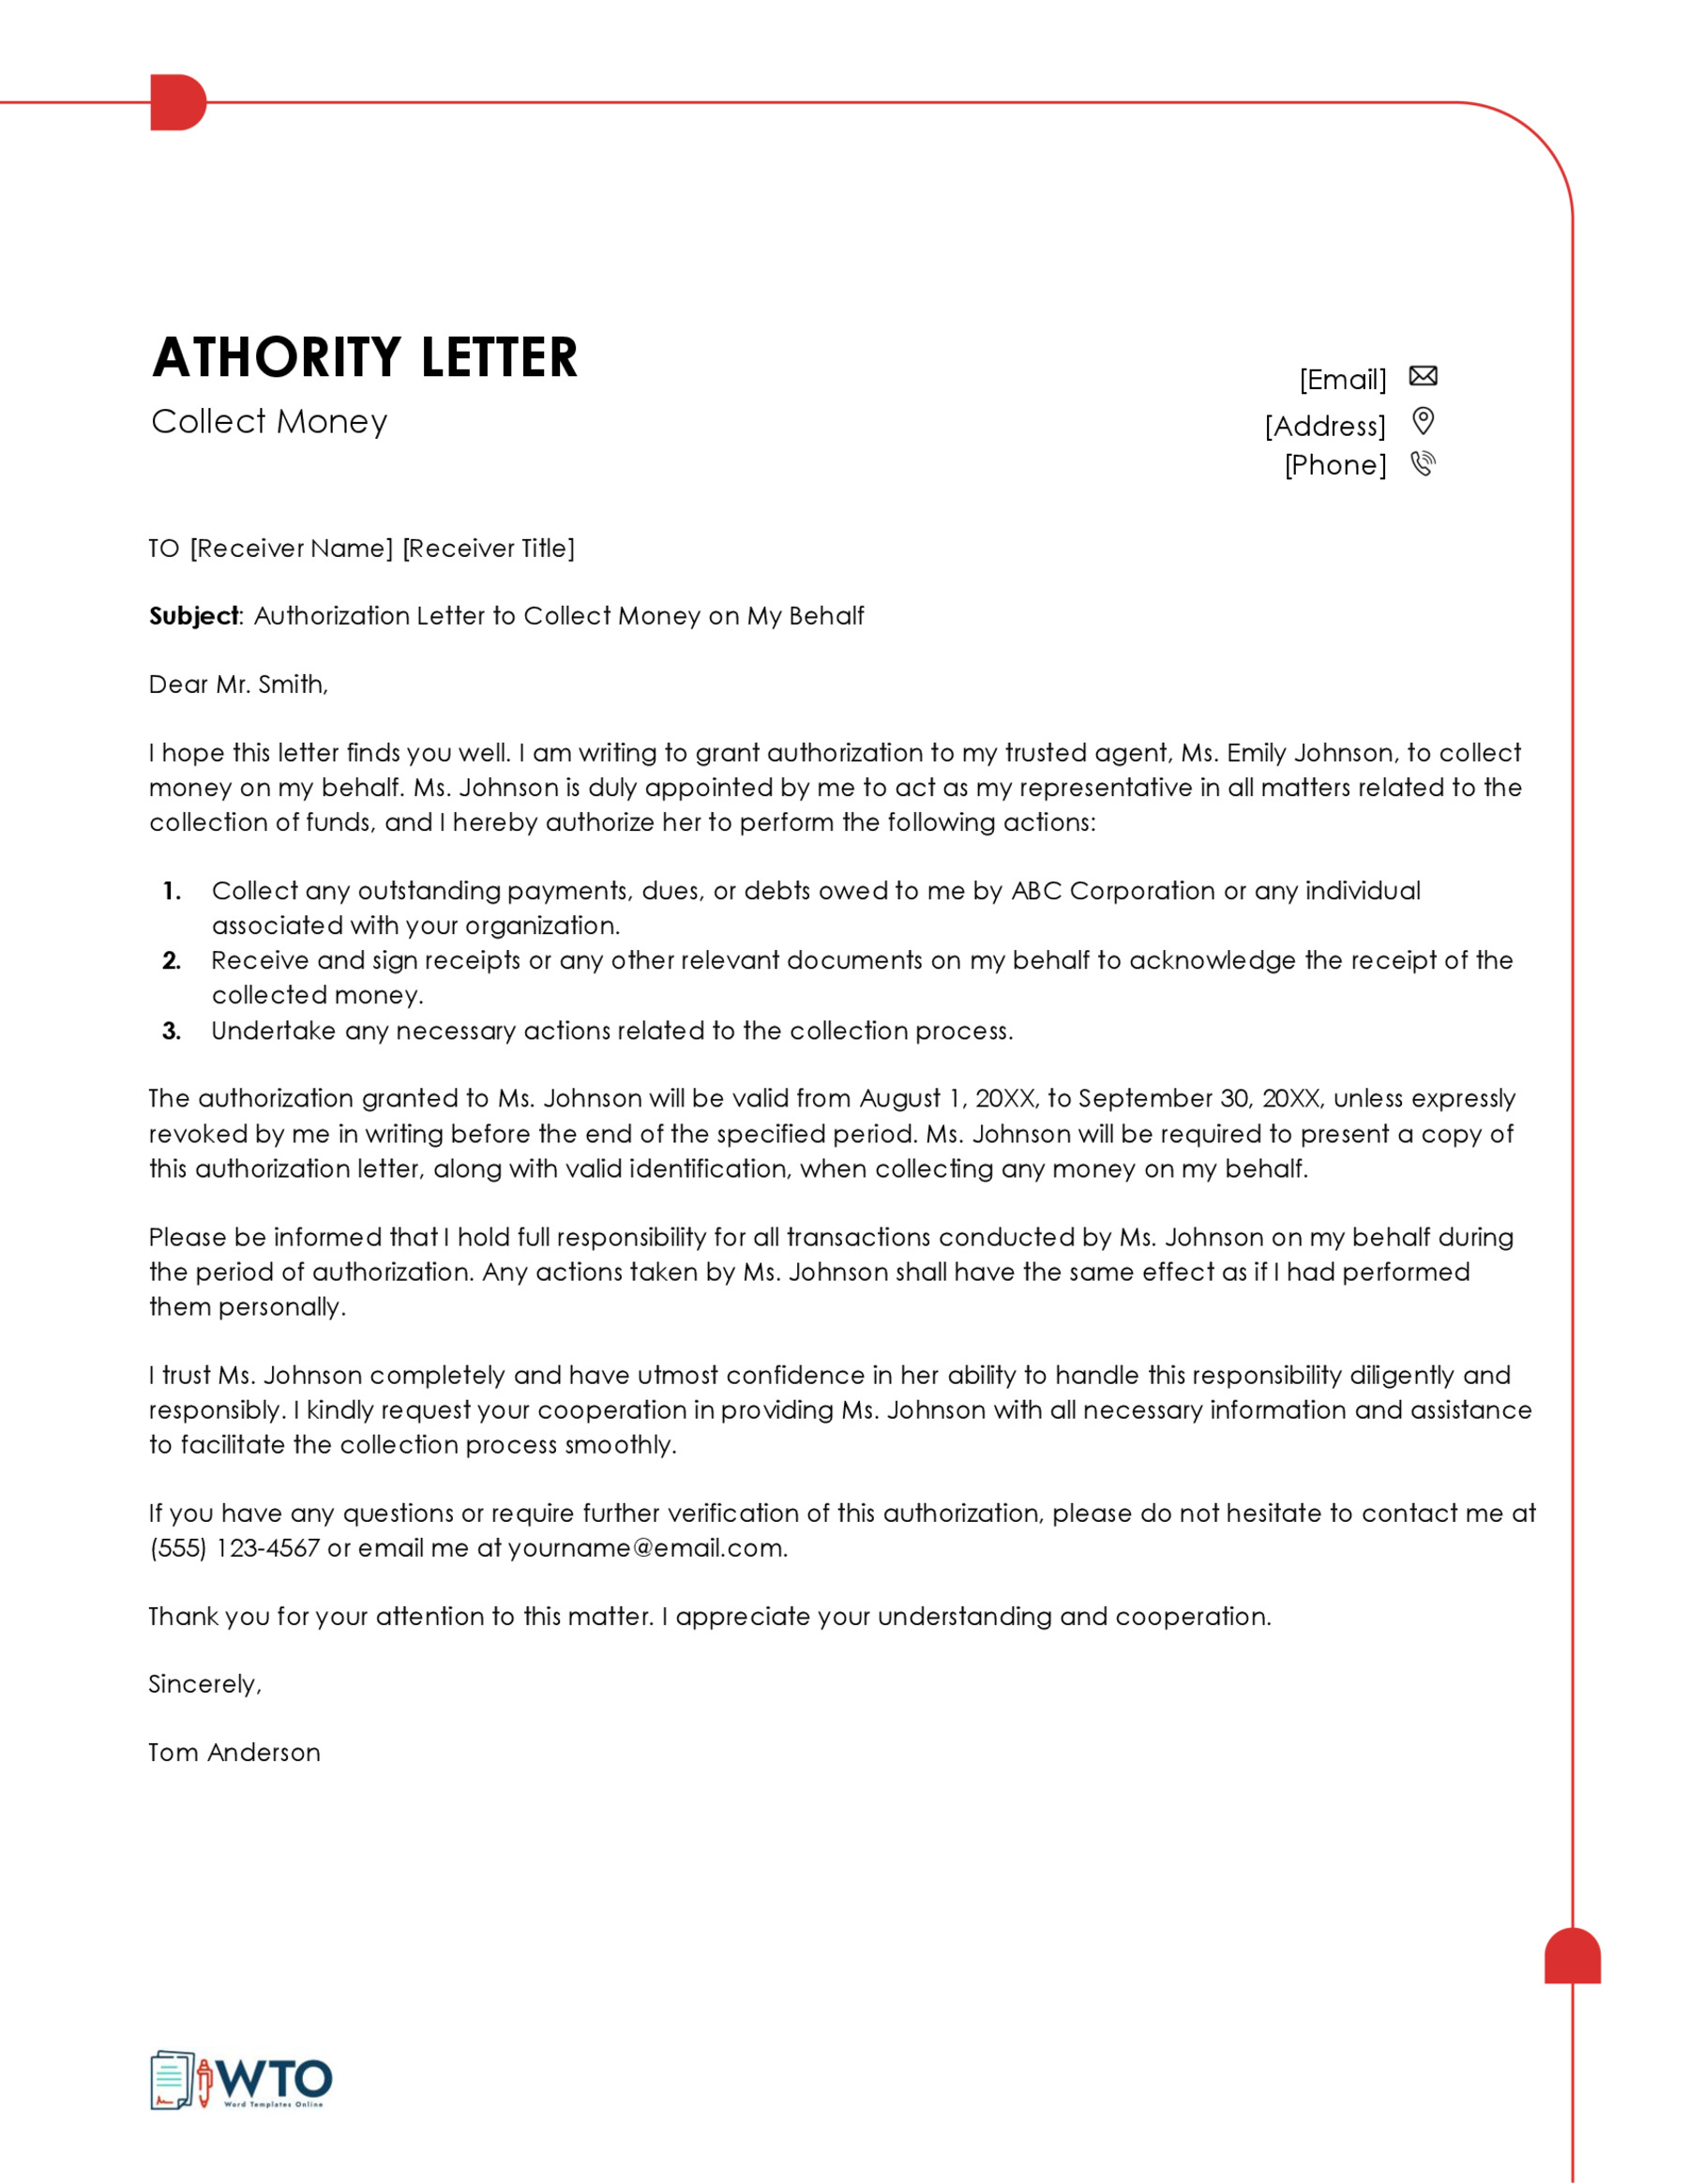 Legal Authorization Letter to collect money Sample